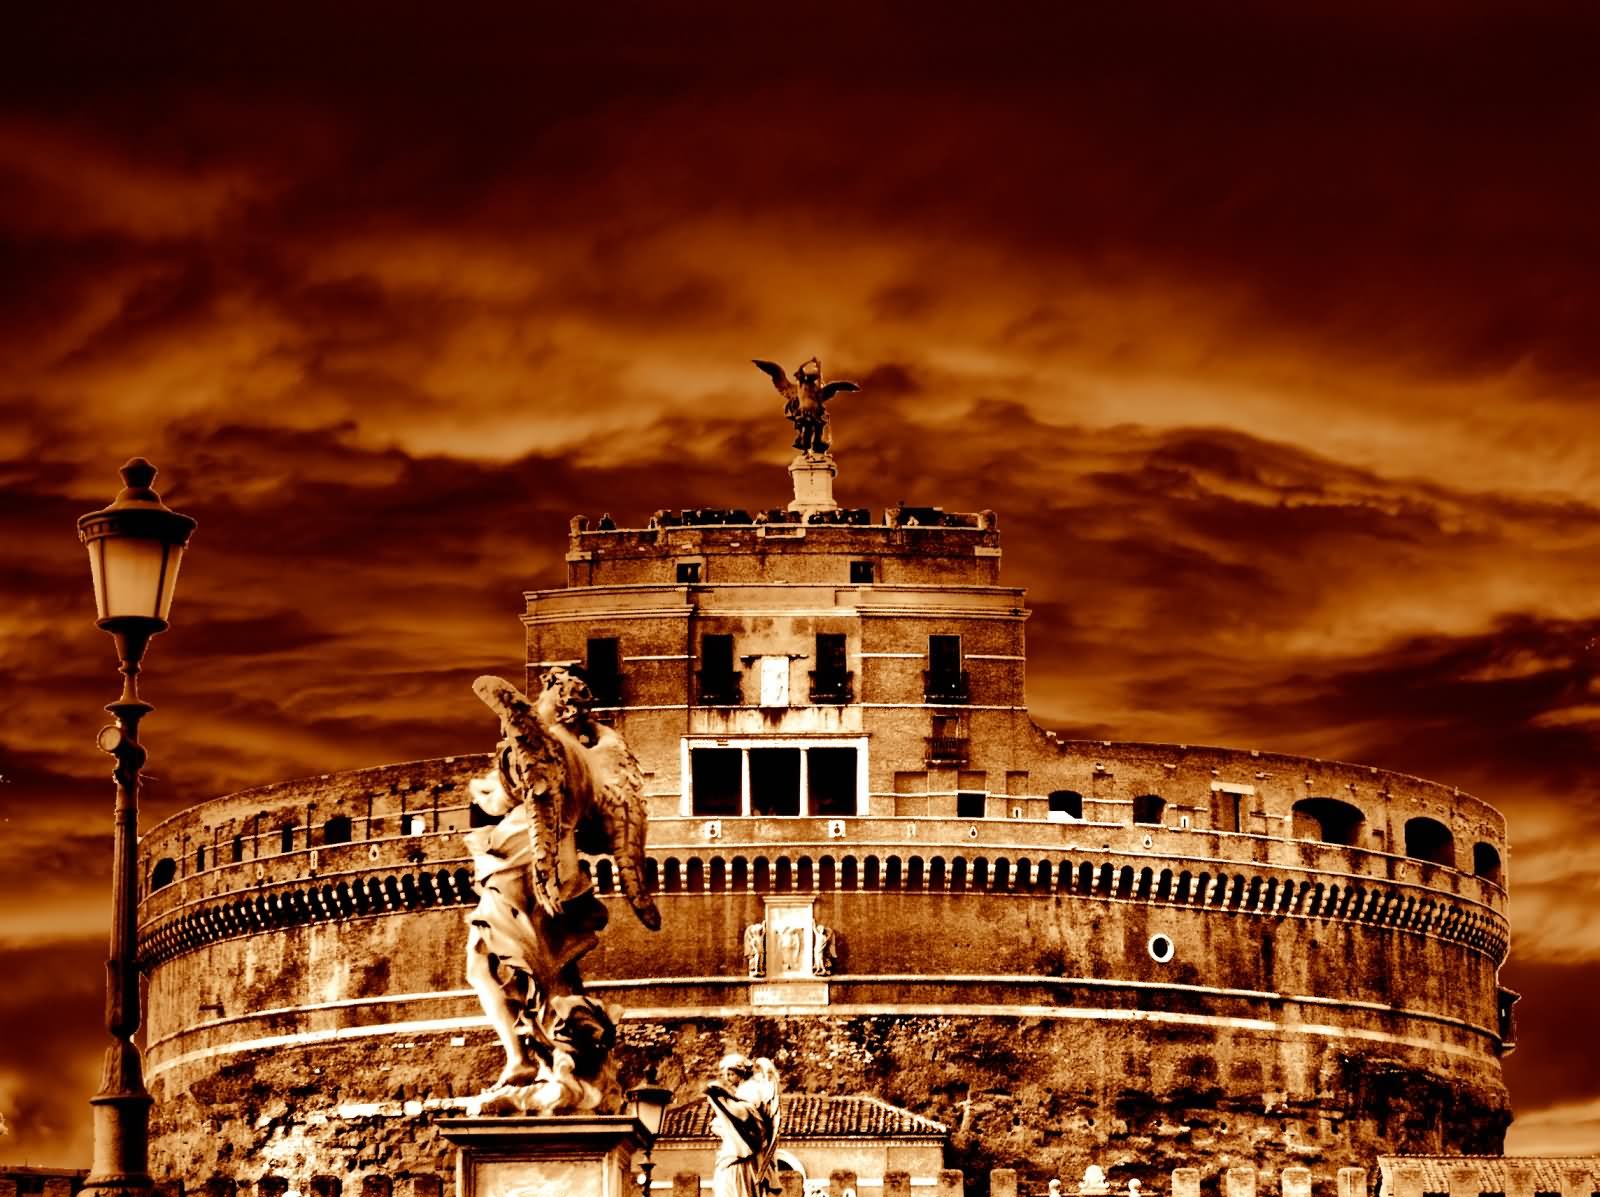 Incredible Image Of Castel Sant'Angelo With Orange Clouds